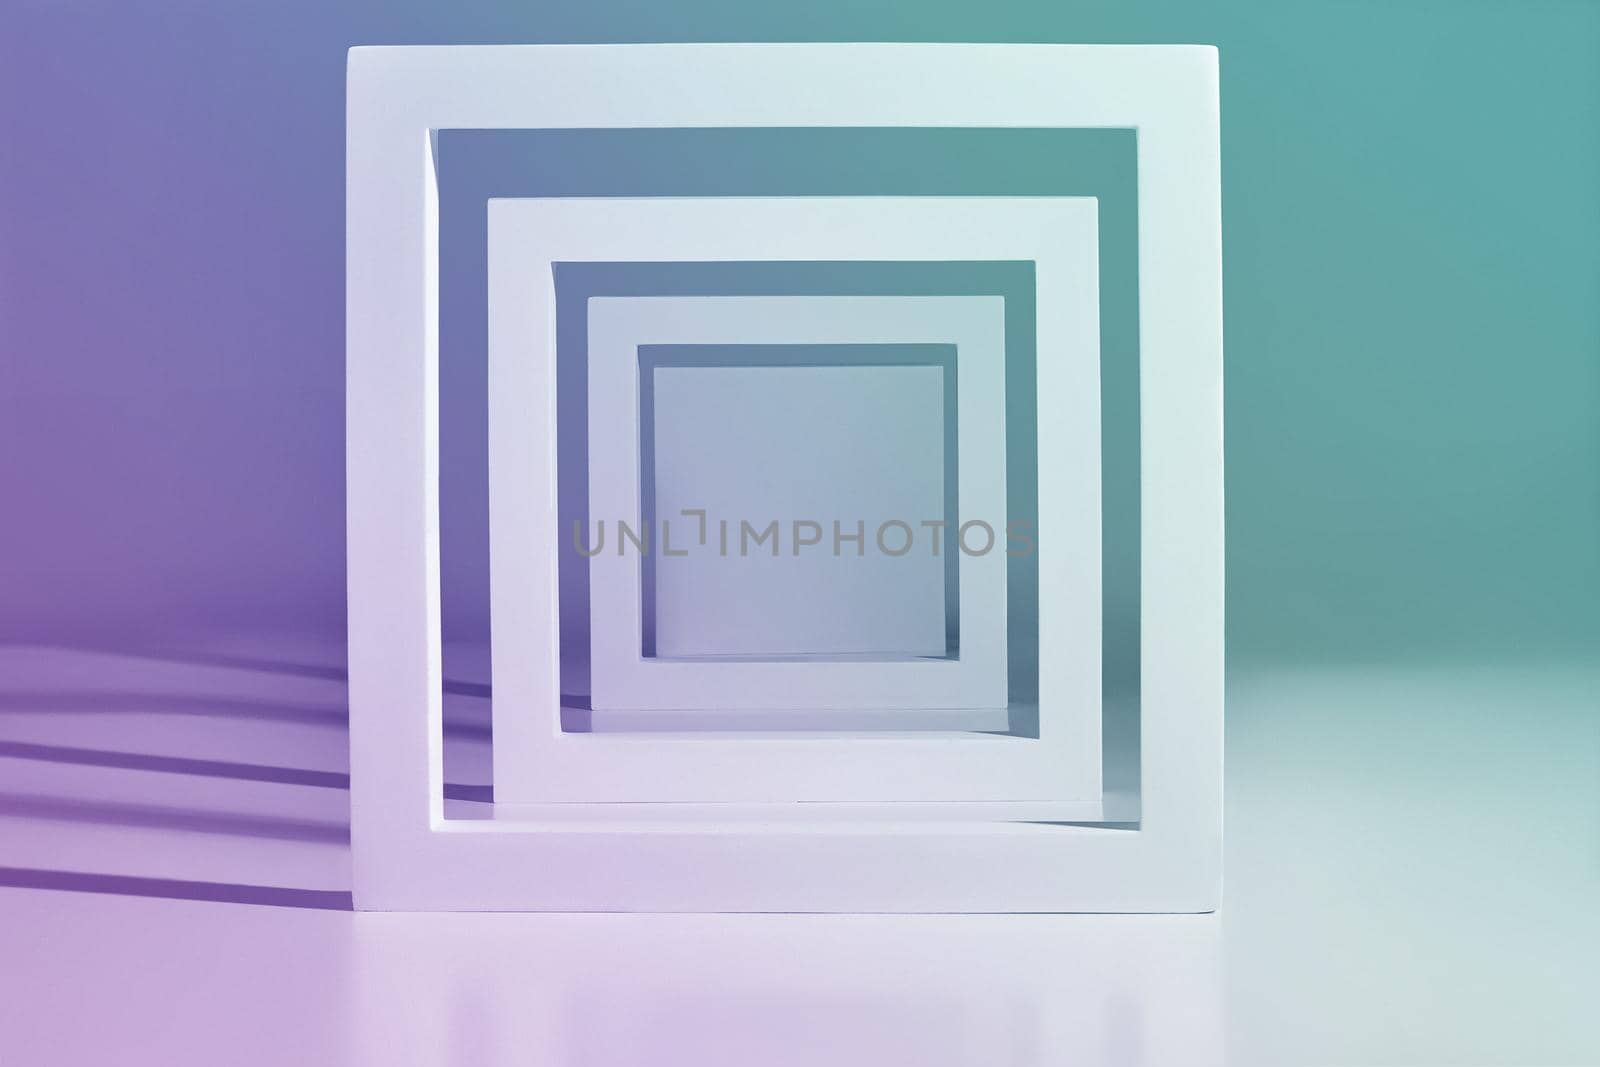 Minimalist construction of podium for displaying product from white square frames of different sizes arranged vertically on colored background with blank space for text. Duotone image